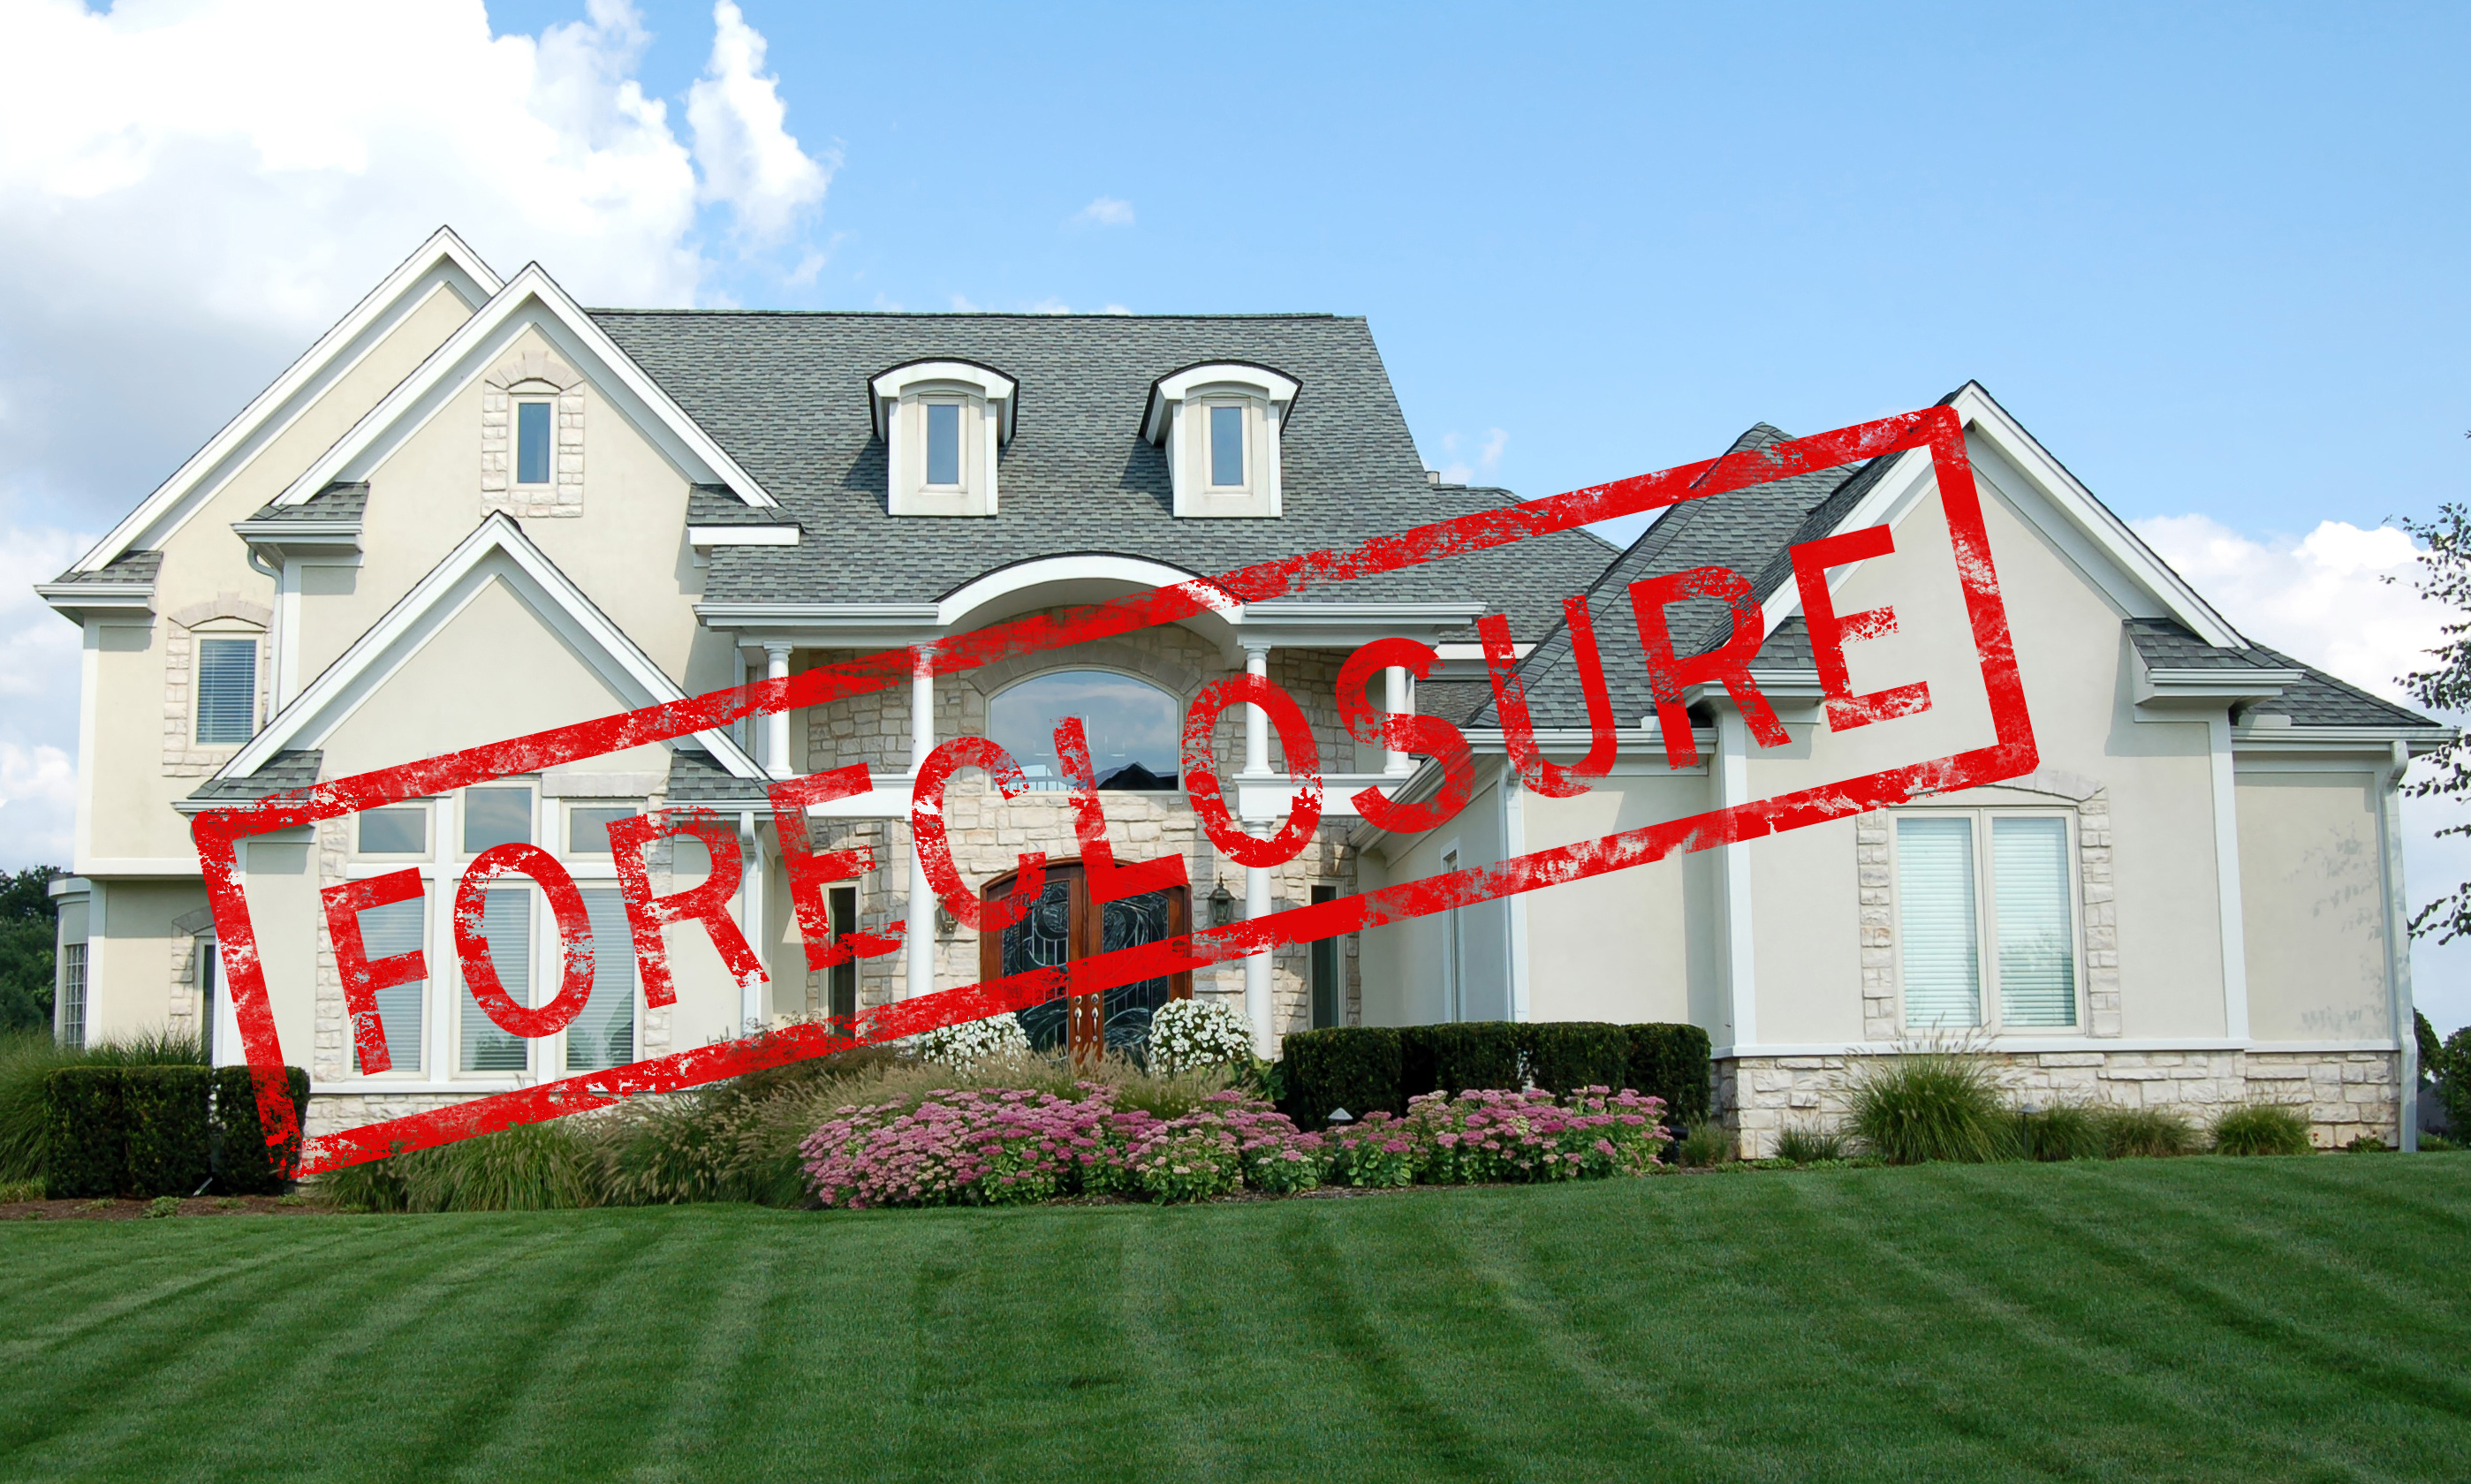 Call EDI Appraisals, Inc. to discuss valuations for Comal foreclosures